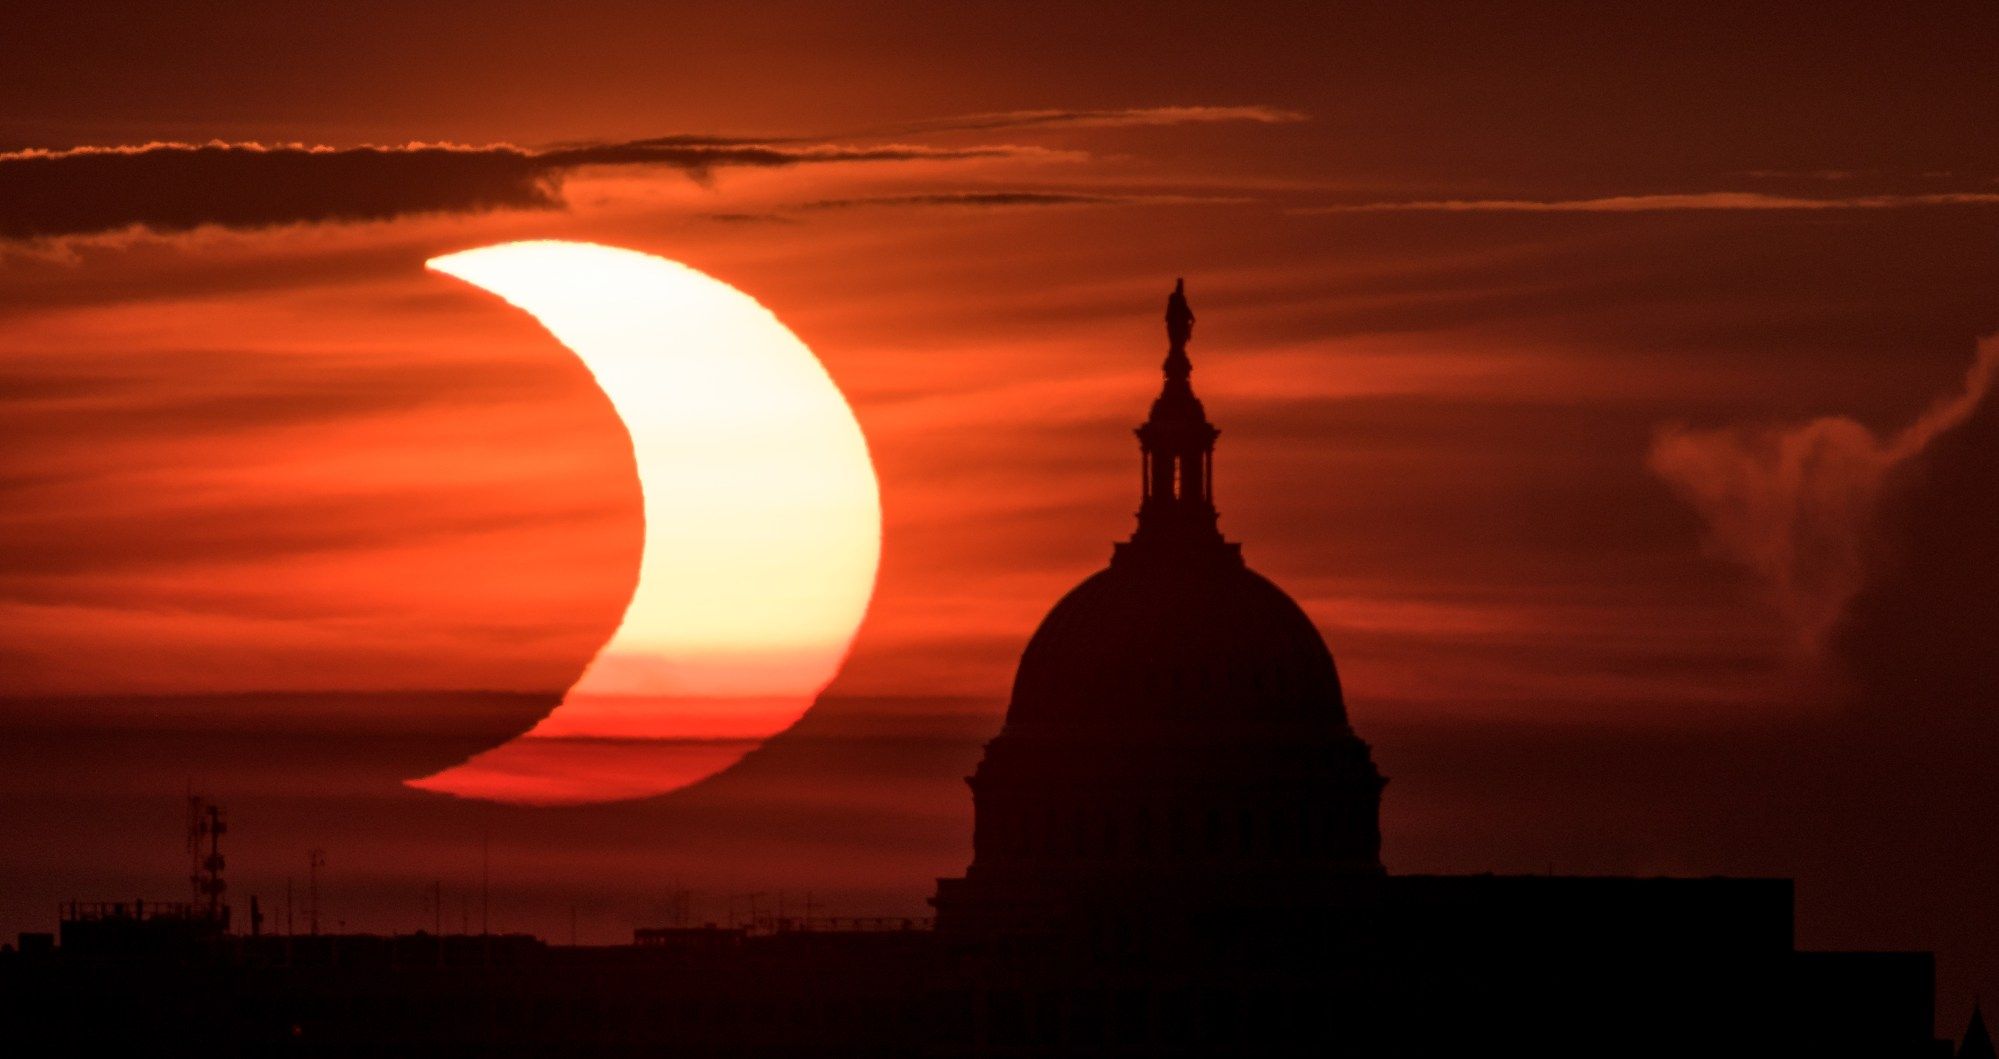 A crescent Sun against a dark orange and red background. It's to the left of the top of the U.S. Capitol Building, shown in silhouette.